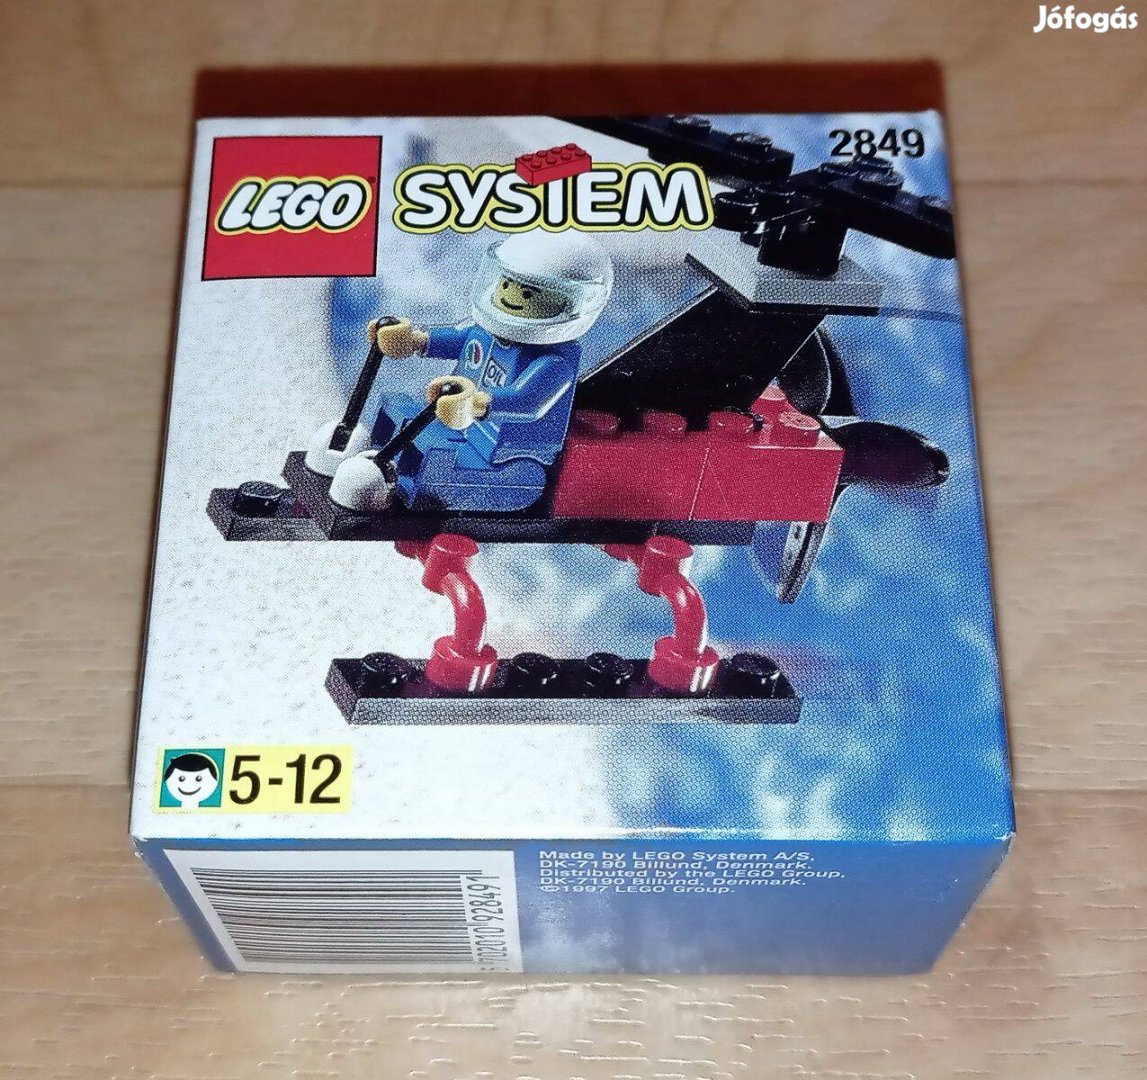 LEGO System Town, Flight: 2849 - Helicopter